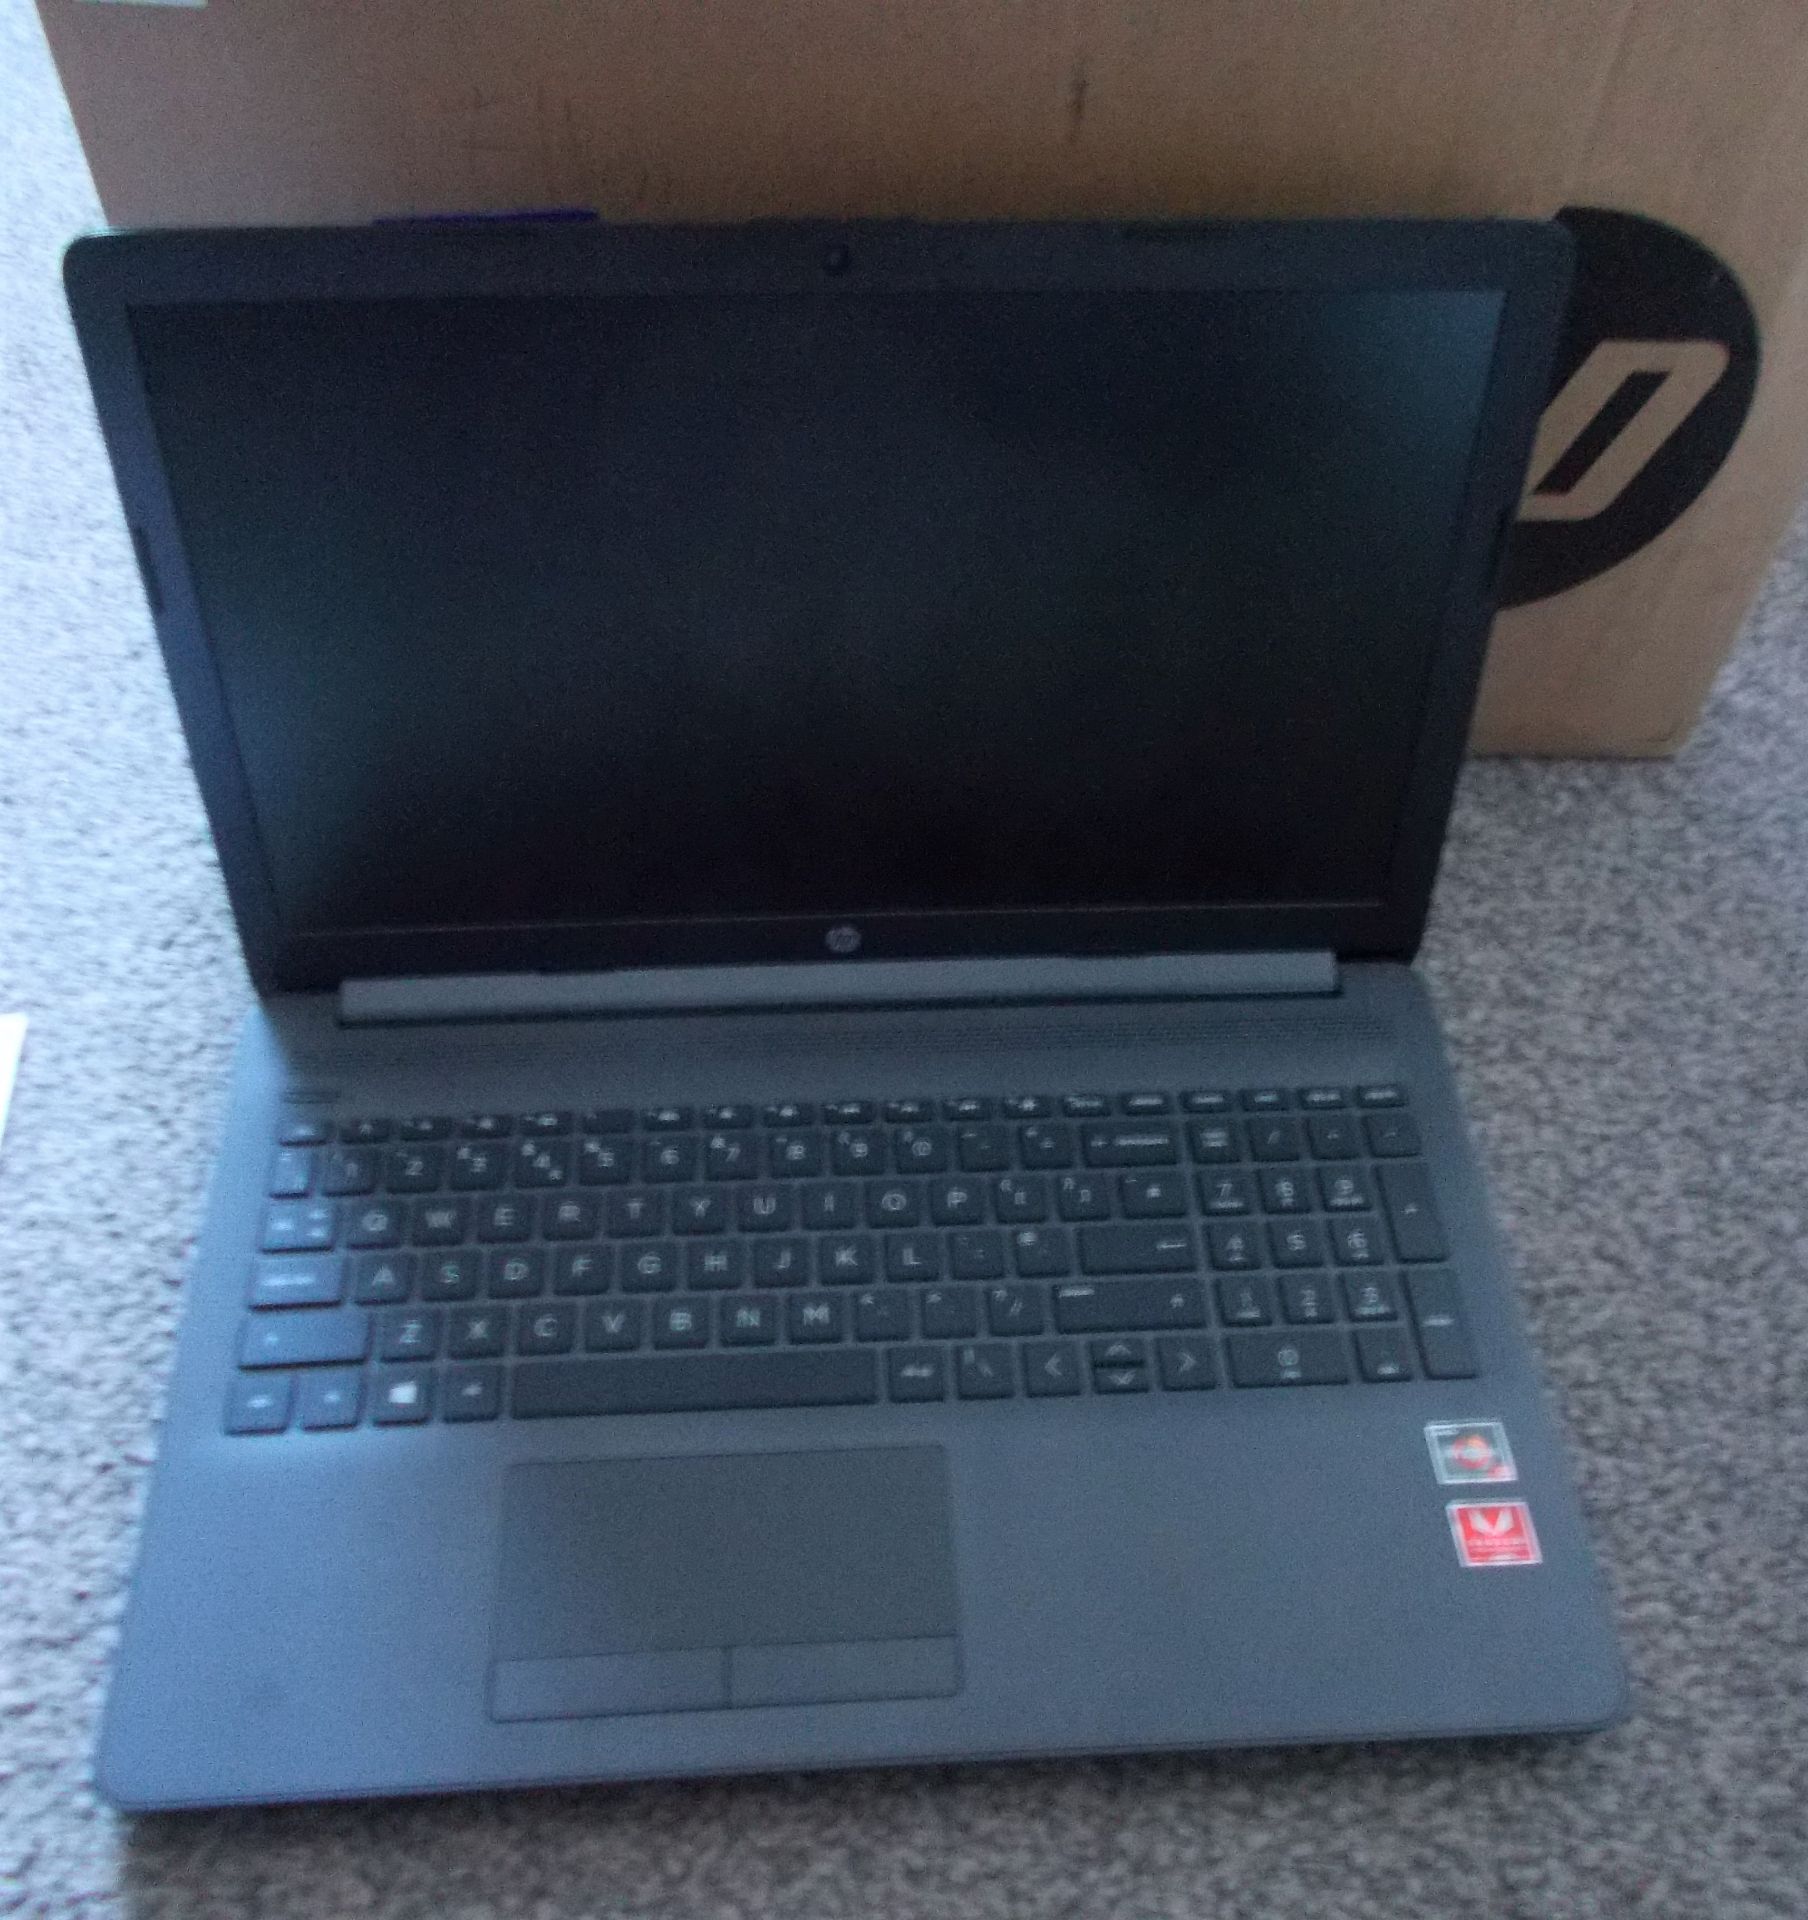 HP 255 G7 Notebook, Serial Number CND9512TW7, Char - Image 2 of 3